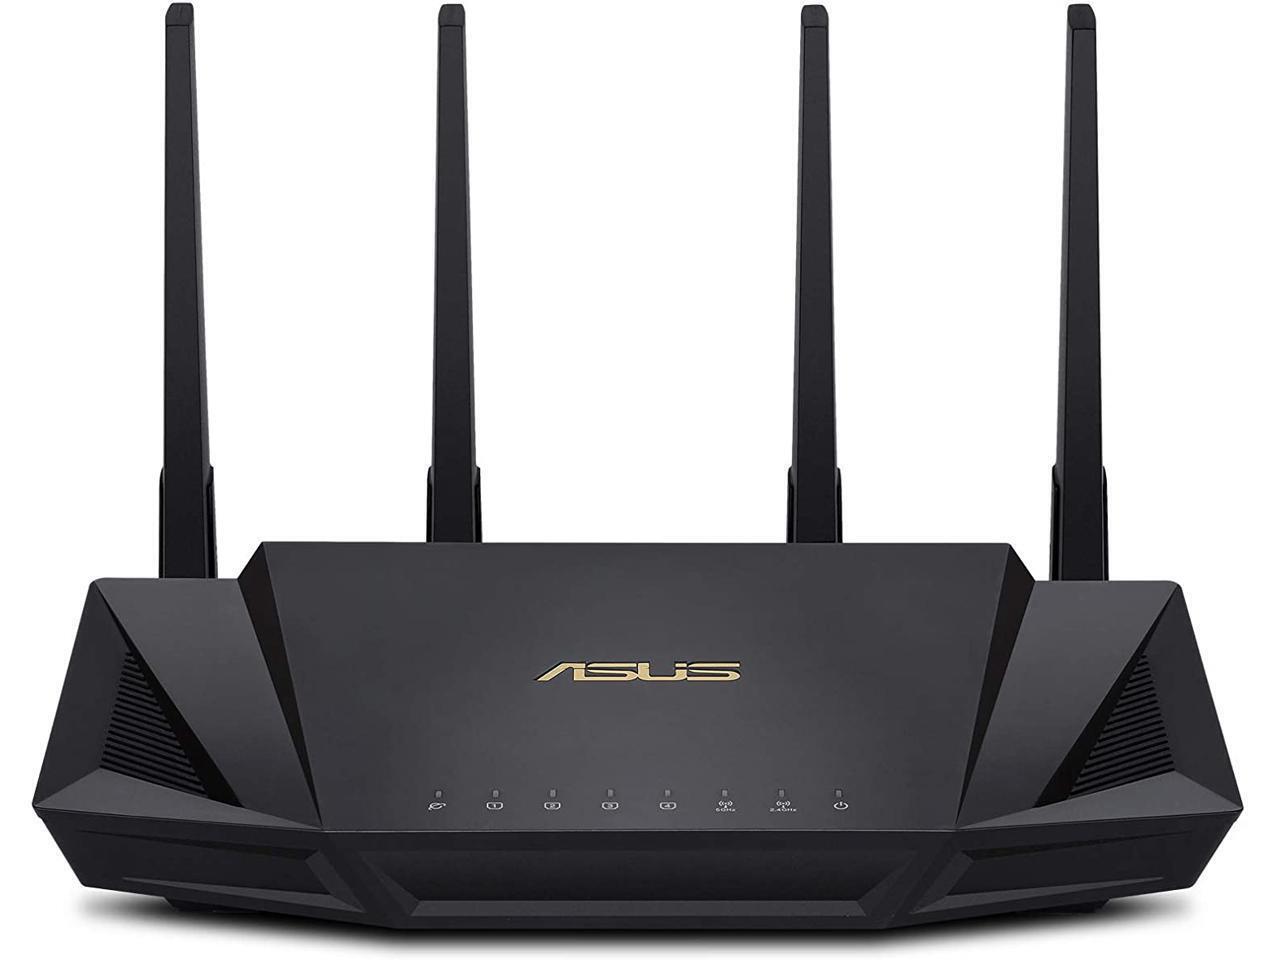 (Excellent Refurb) ASUS RT-AX3000 AX3000 Wi-Fi 6 Wireless Dual-Band Gigabit Router $68 + Free Shipping